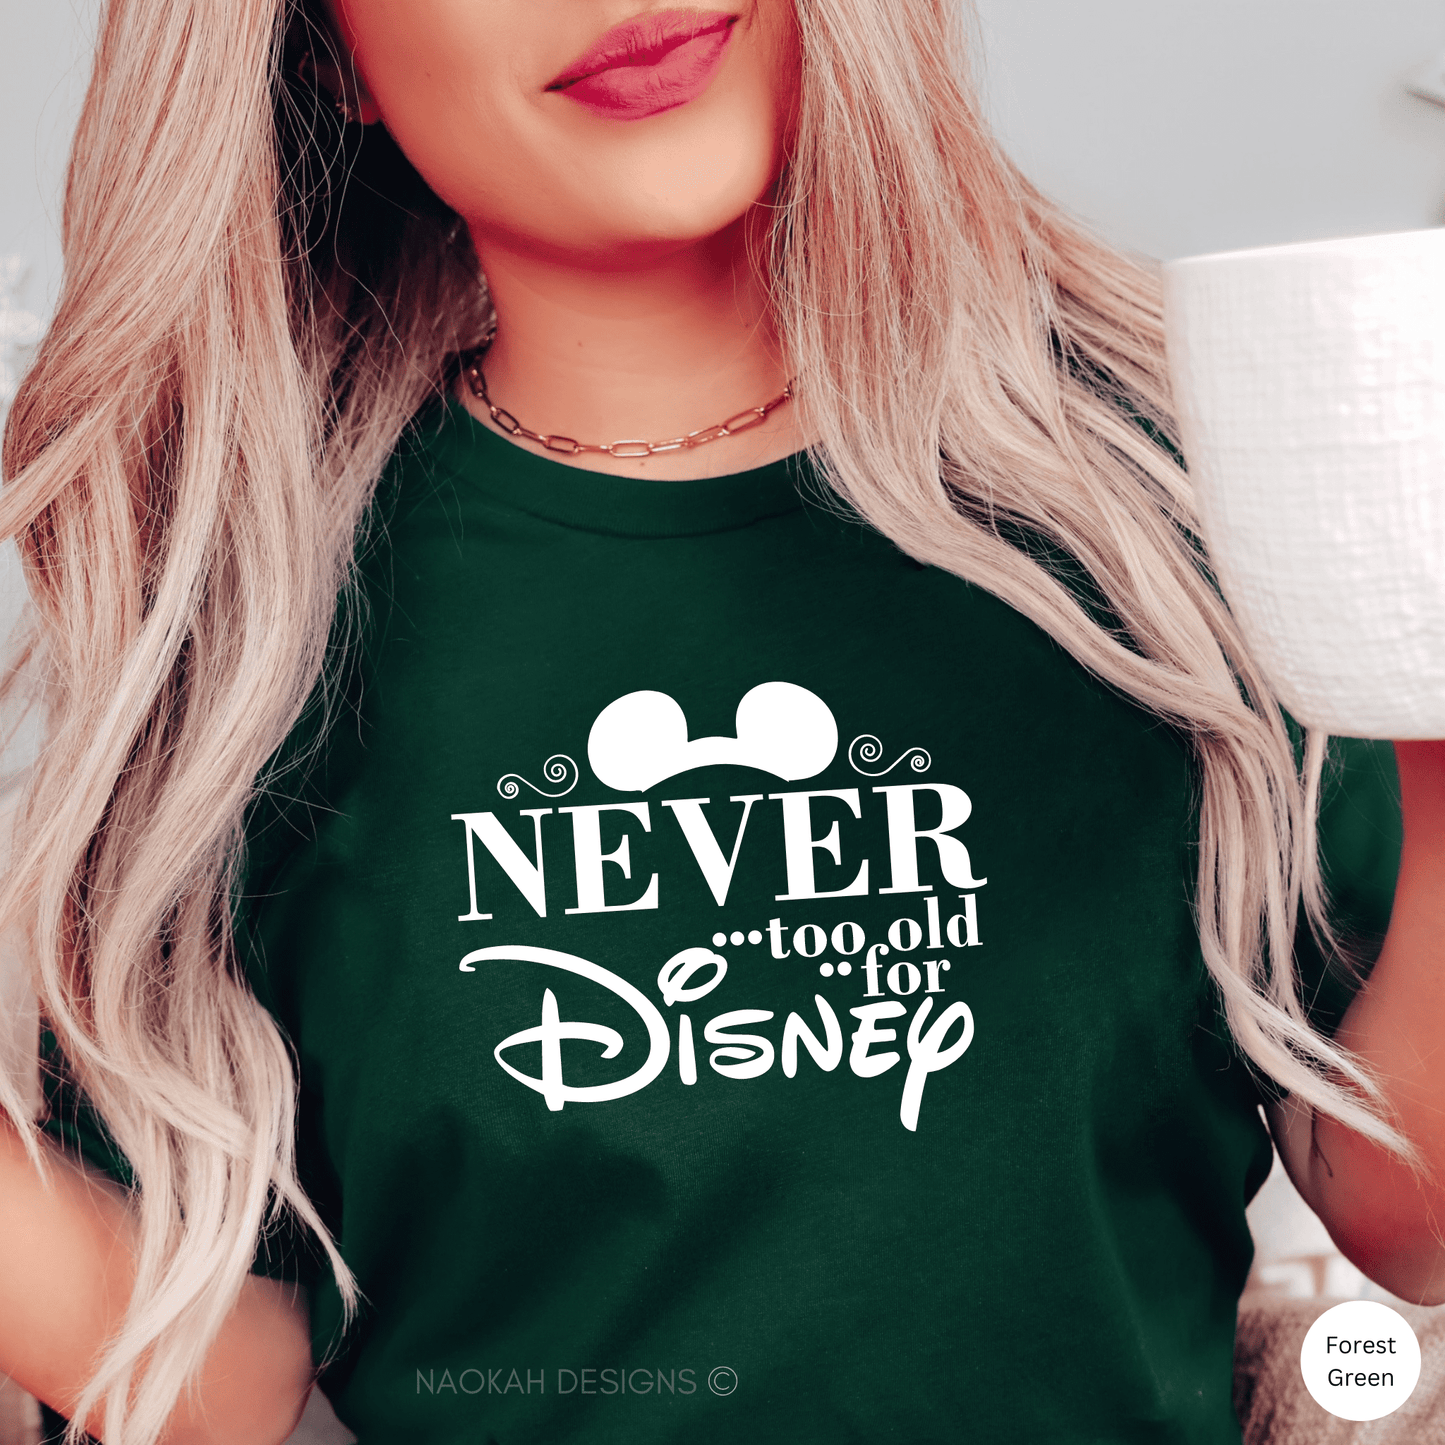 never too old for disney shirt, family disney vacation shirts, group shirts for vacation trip, mouse ears sweater, mickey shirt, minnie shirt, magical place on earth shirt, first disney trip shirt